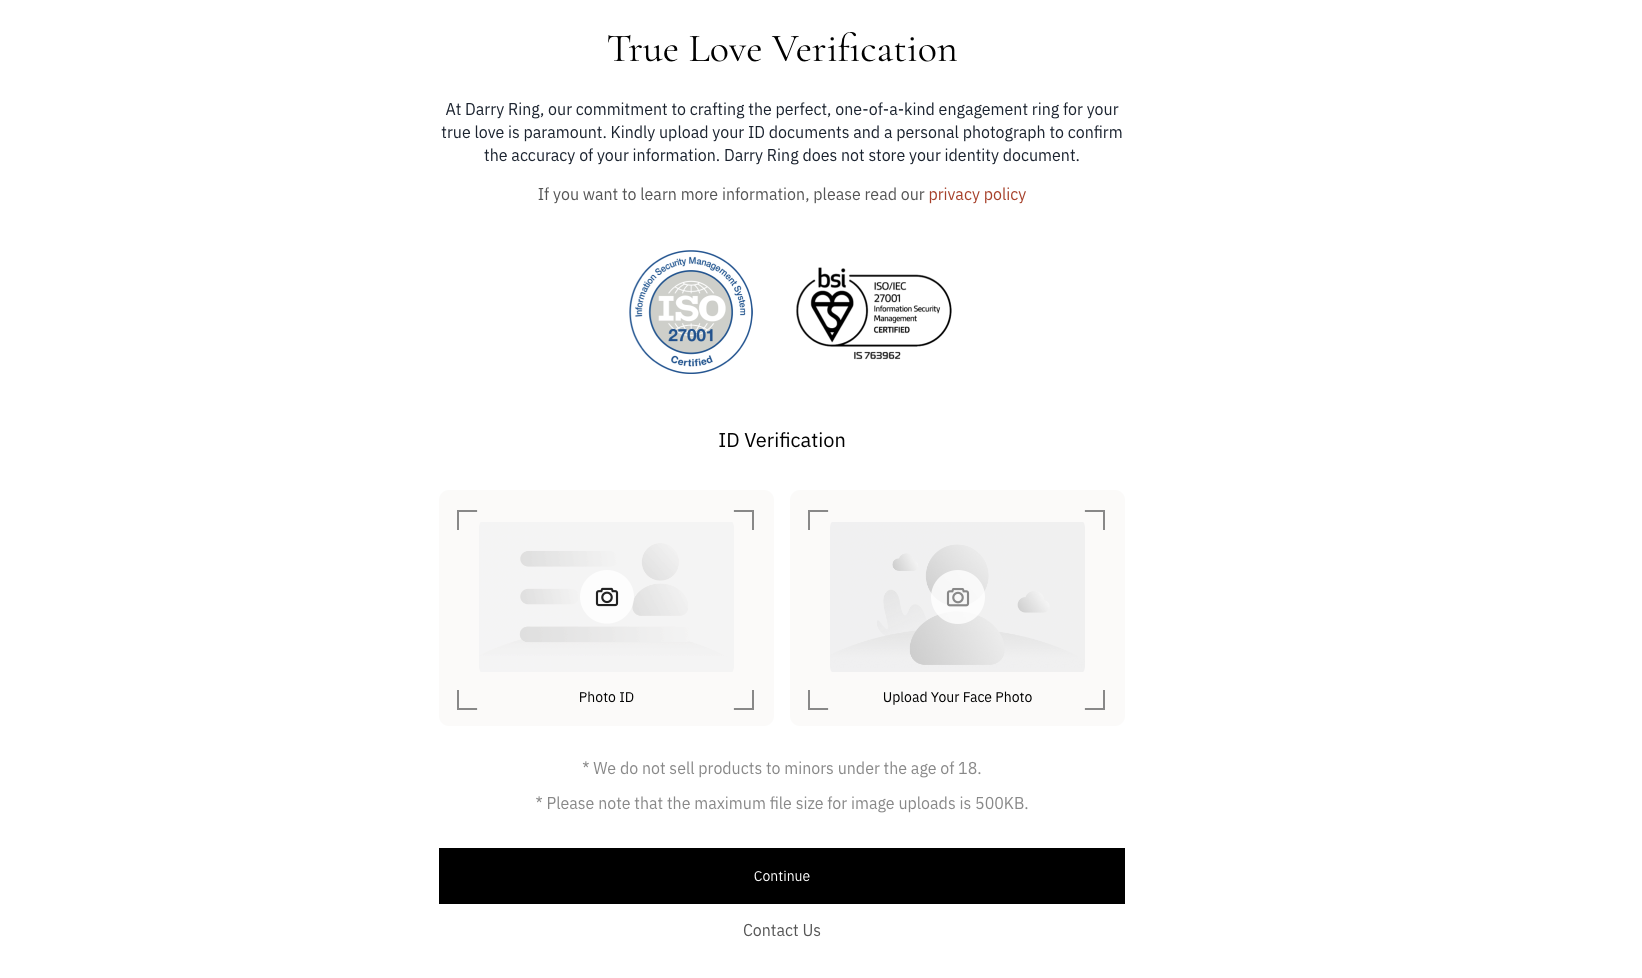 darry ring id verification system